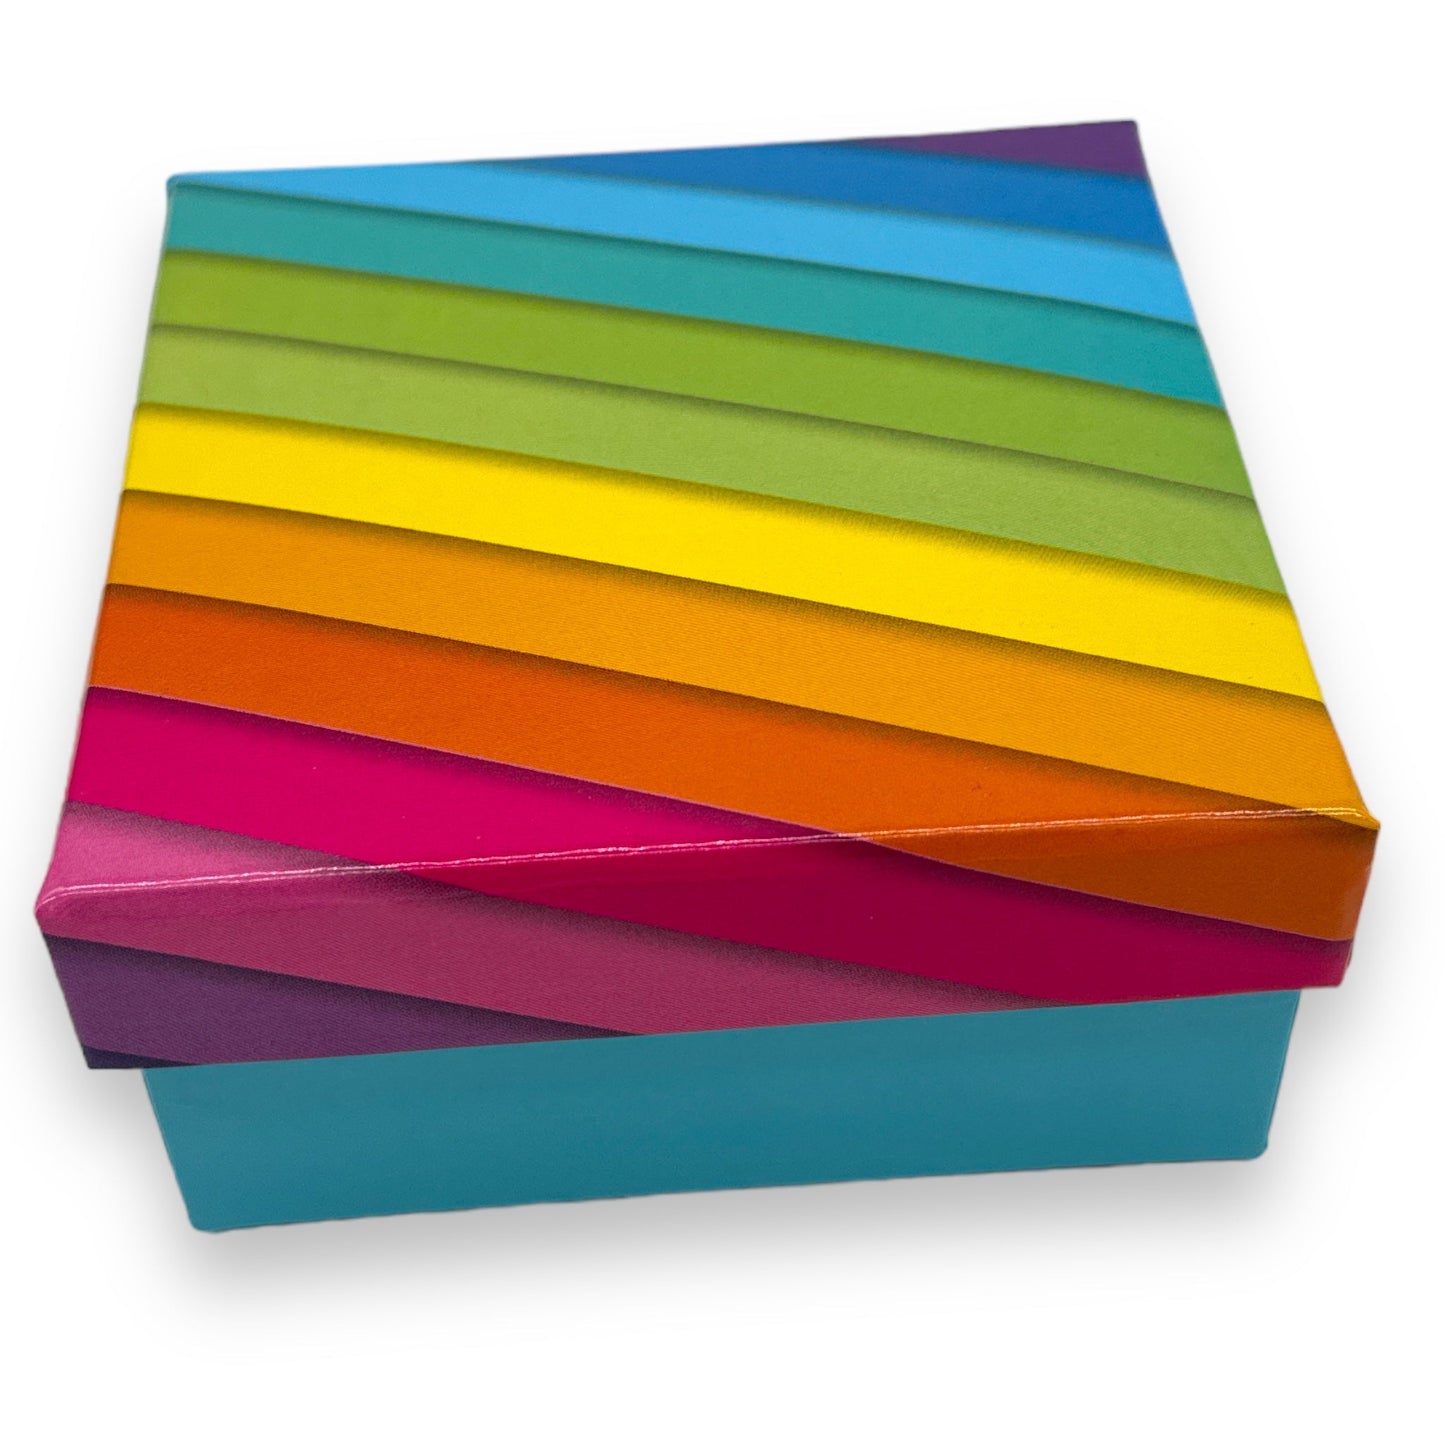 Rainbow Cardboard Box - 10x4.8 cm - Add Color and Style to Your Storage Space